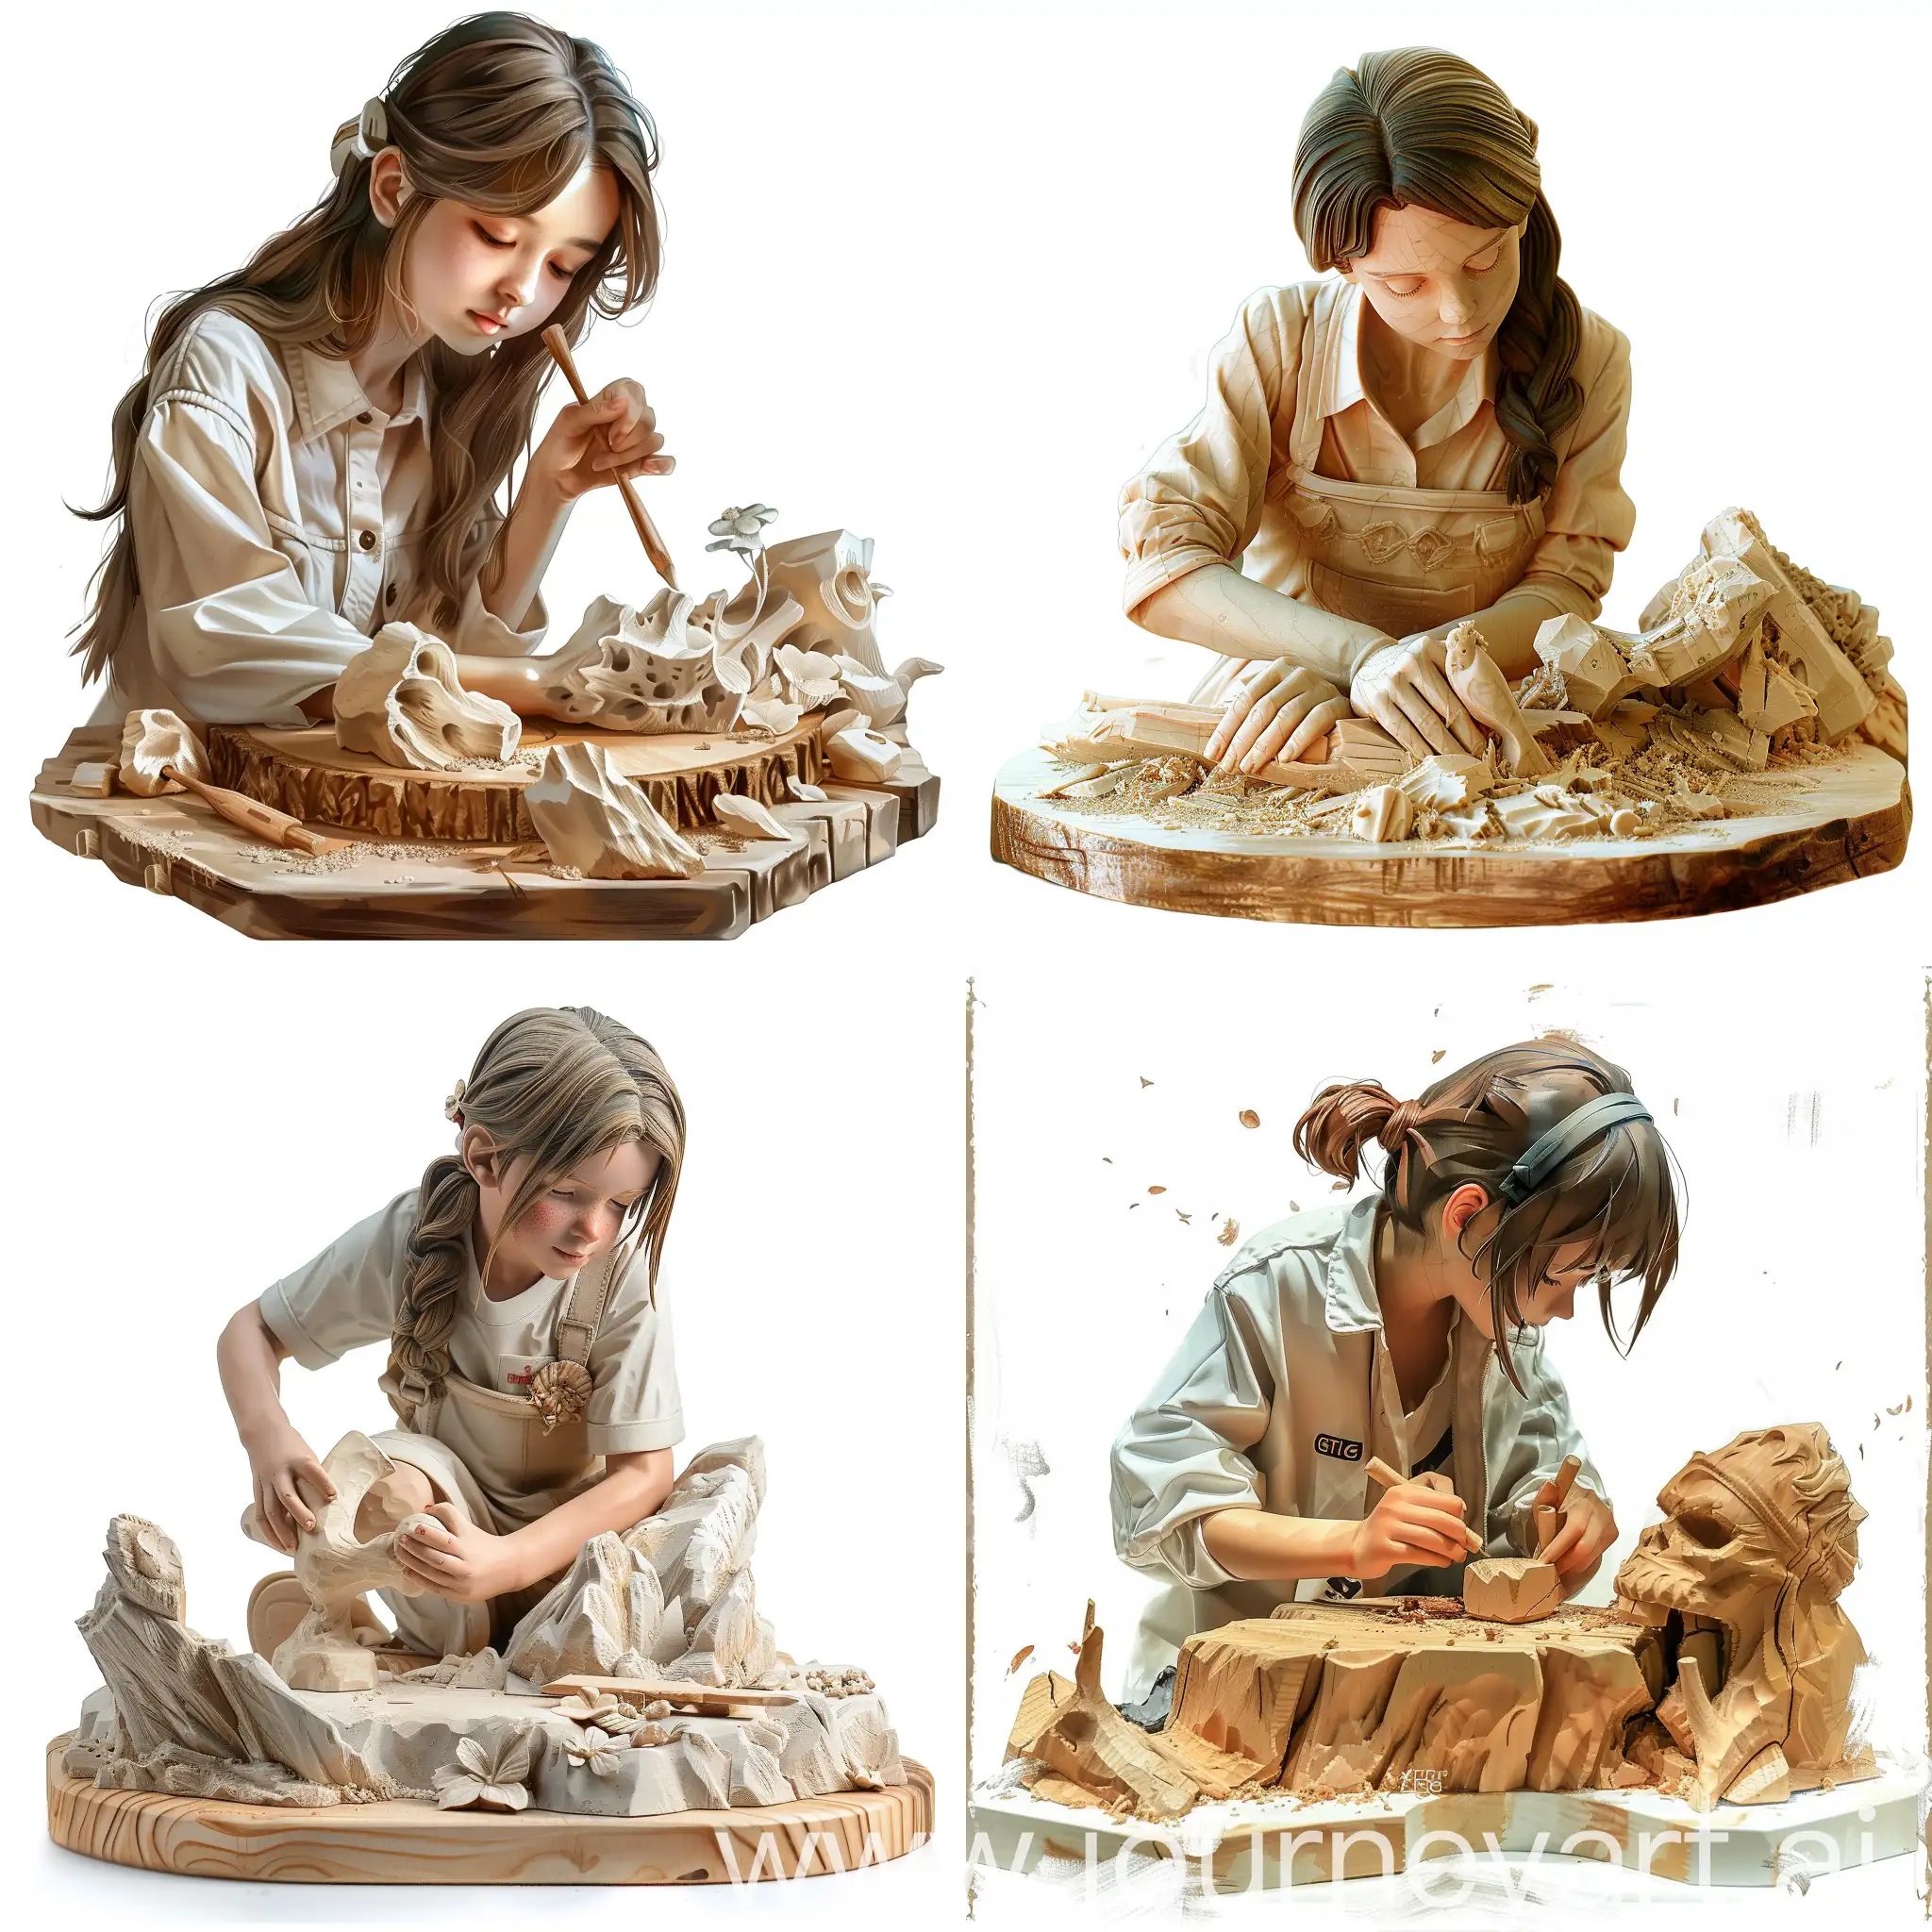 GTI-6-Style-Girl-Carving-Wood-Sculpture-on-White-Background